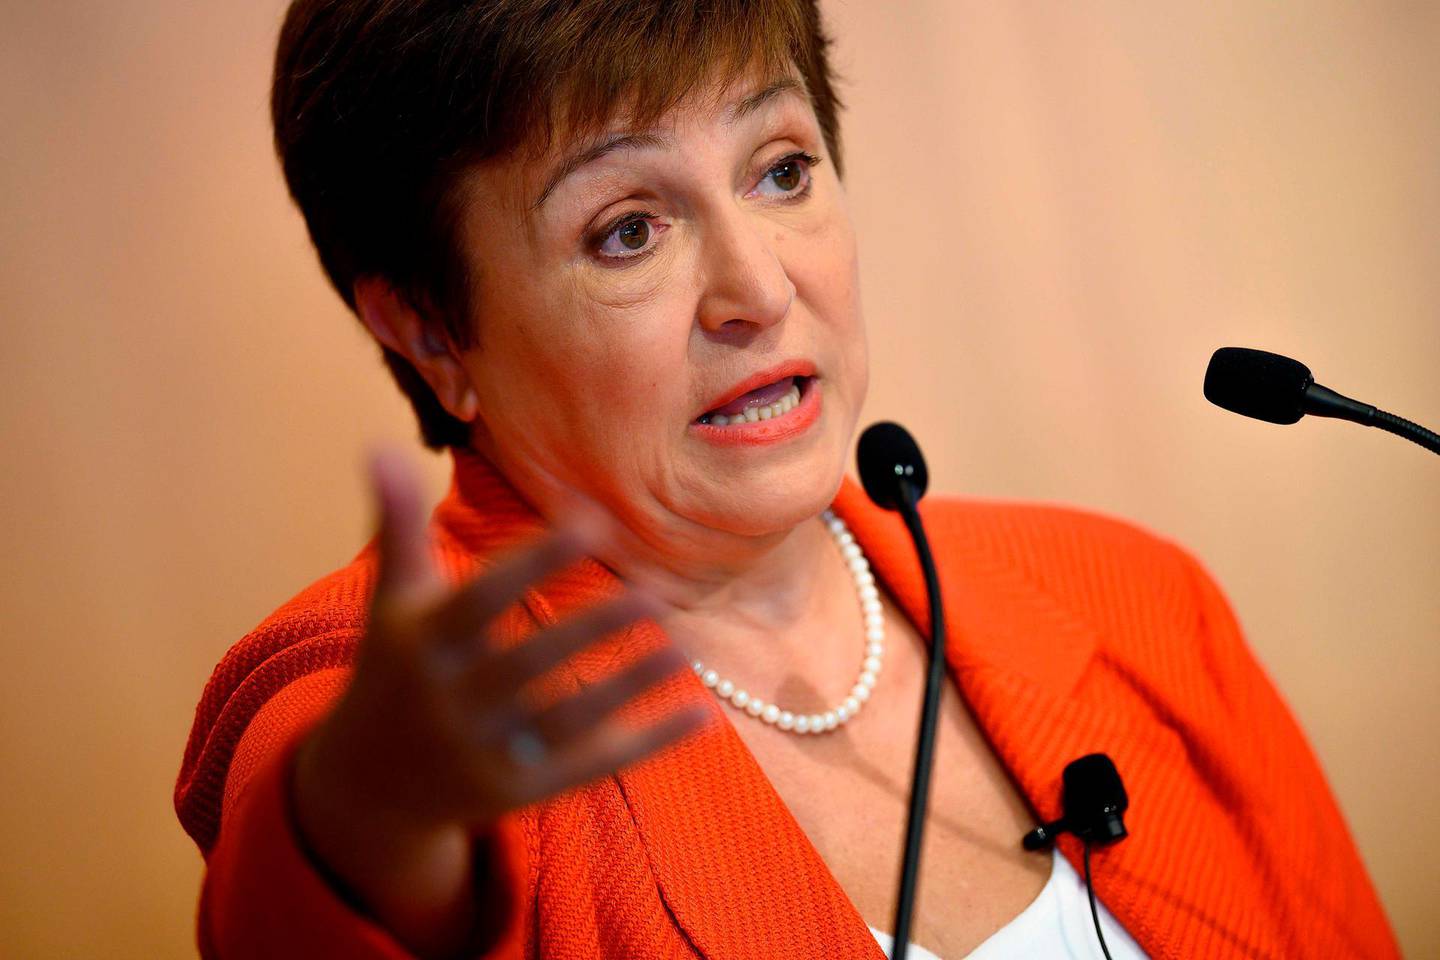 (FILES) In this file photo taken on January 17, 2020, Managing Director of the International Monetary Fund (IMF) Kristalina Georgieva speaks in Washington, DC. The coronavirus pandemic has driven the global economy into a downturn that will require massive funding to help developing nations, Georgieva said on March 27. 2020. / AFP / JIM WATSON
